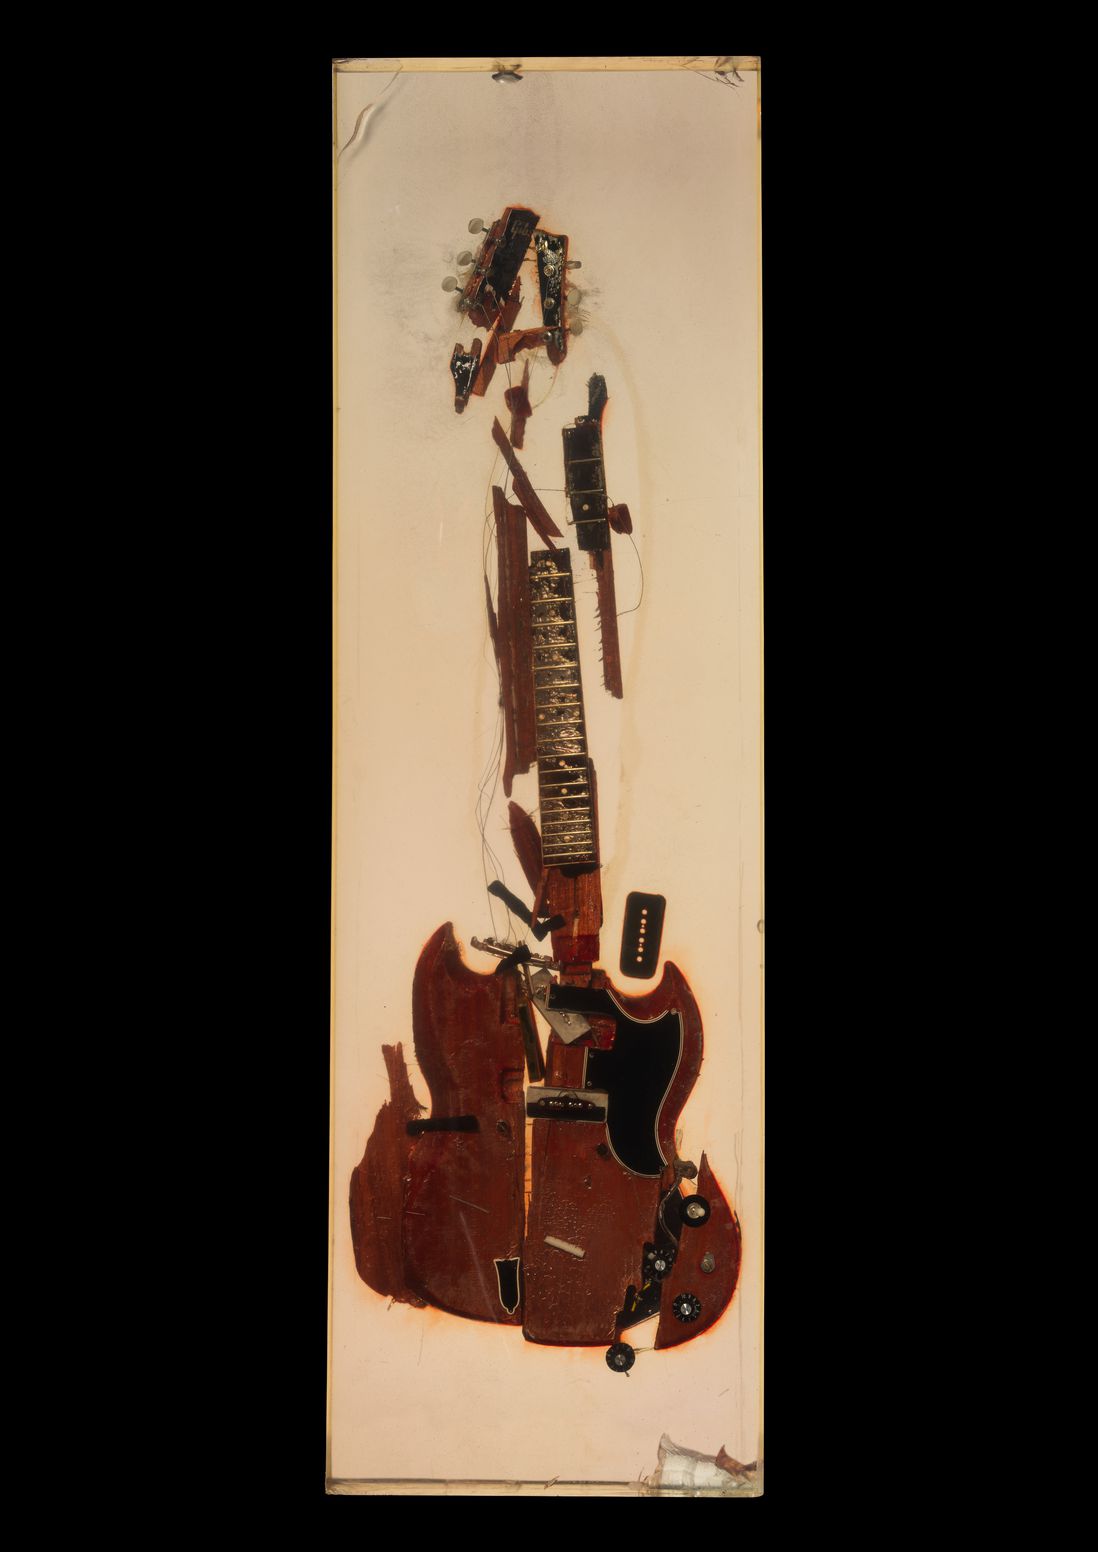 Pete Townshend smashed this Gibson guitar in a photo shoot by Annie Liebovitz, titled “How to Launch Your Guitar in 17 Steps,” for Rolling Stone. This sculpture made from its remains has been on display in the Rolling Stone office building for decades.